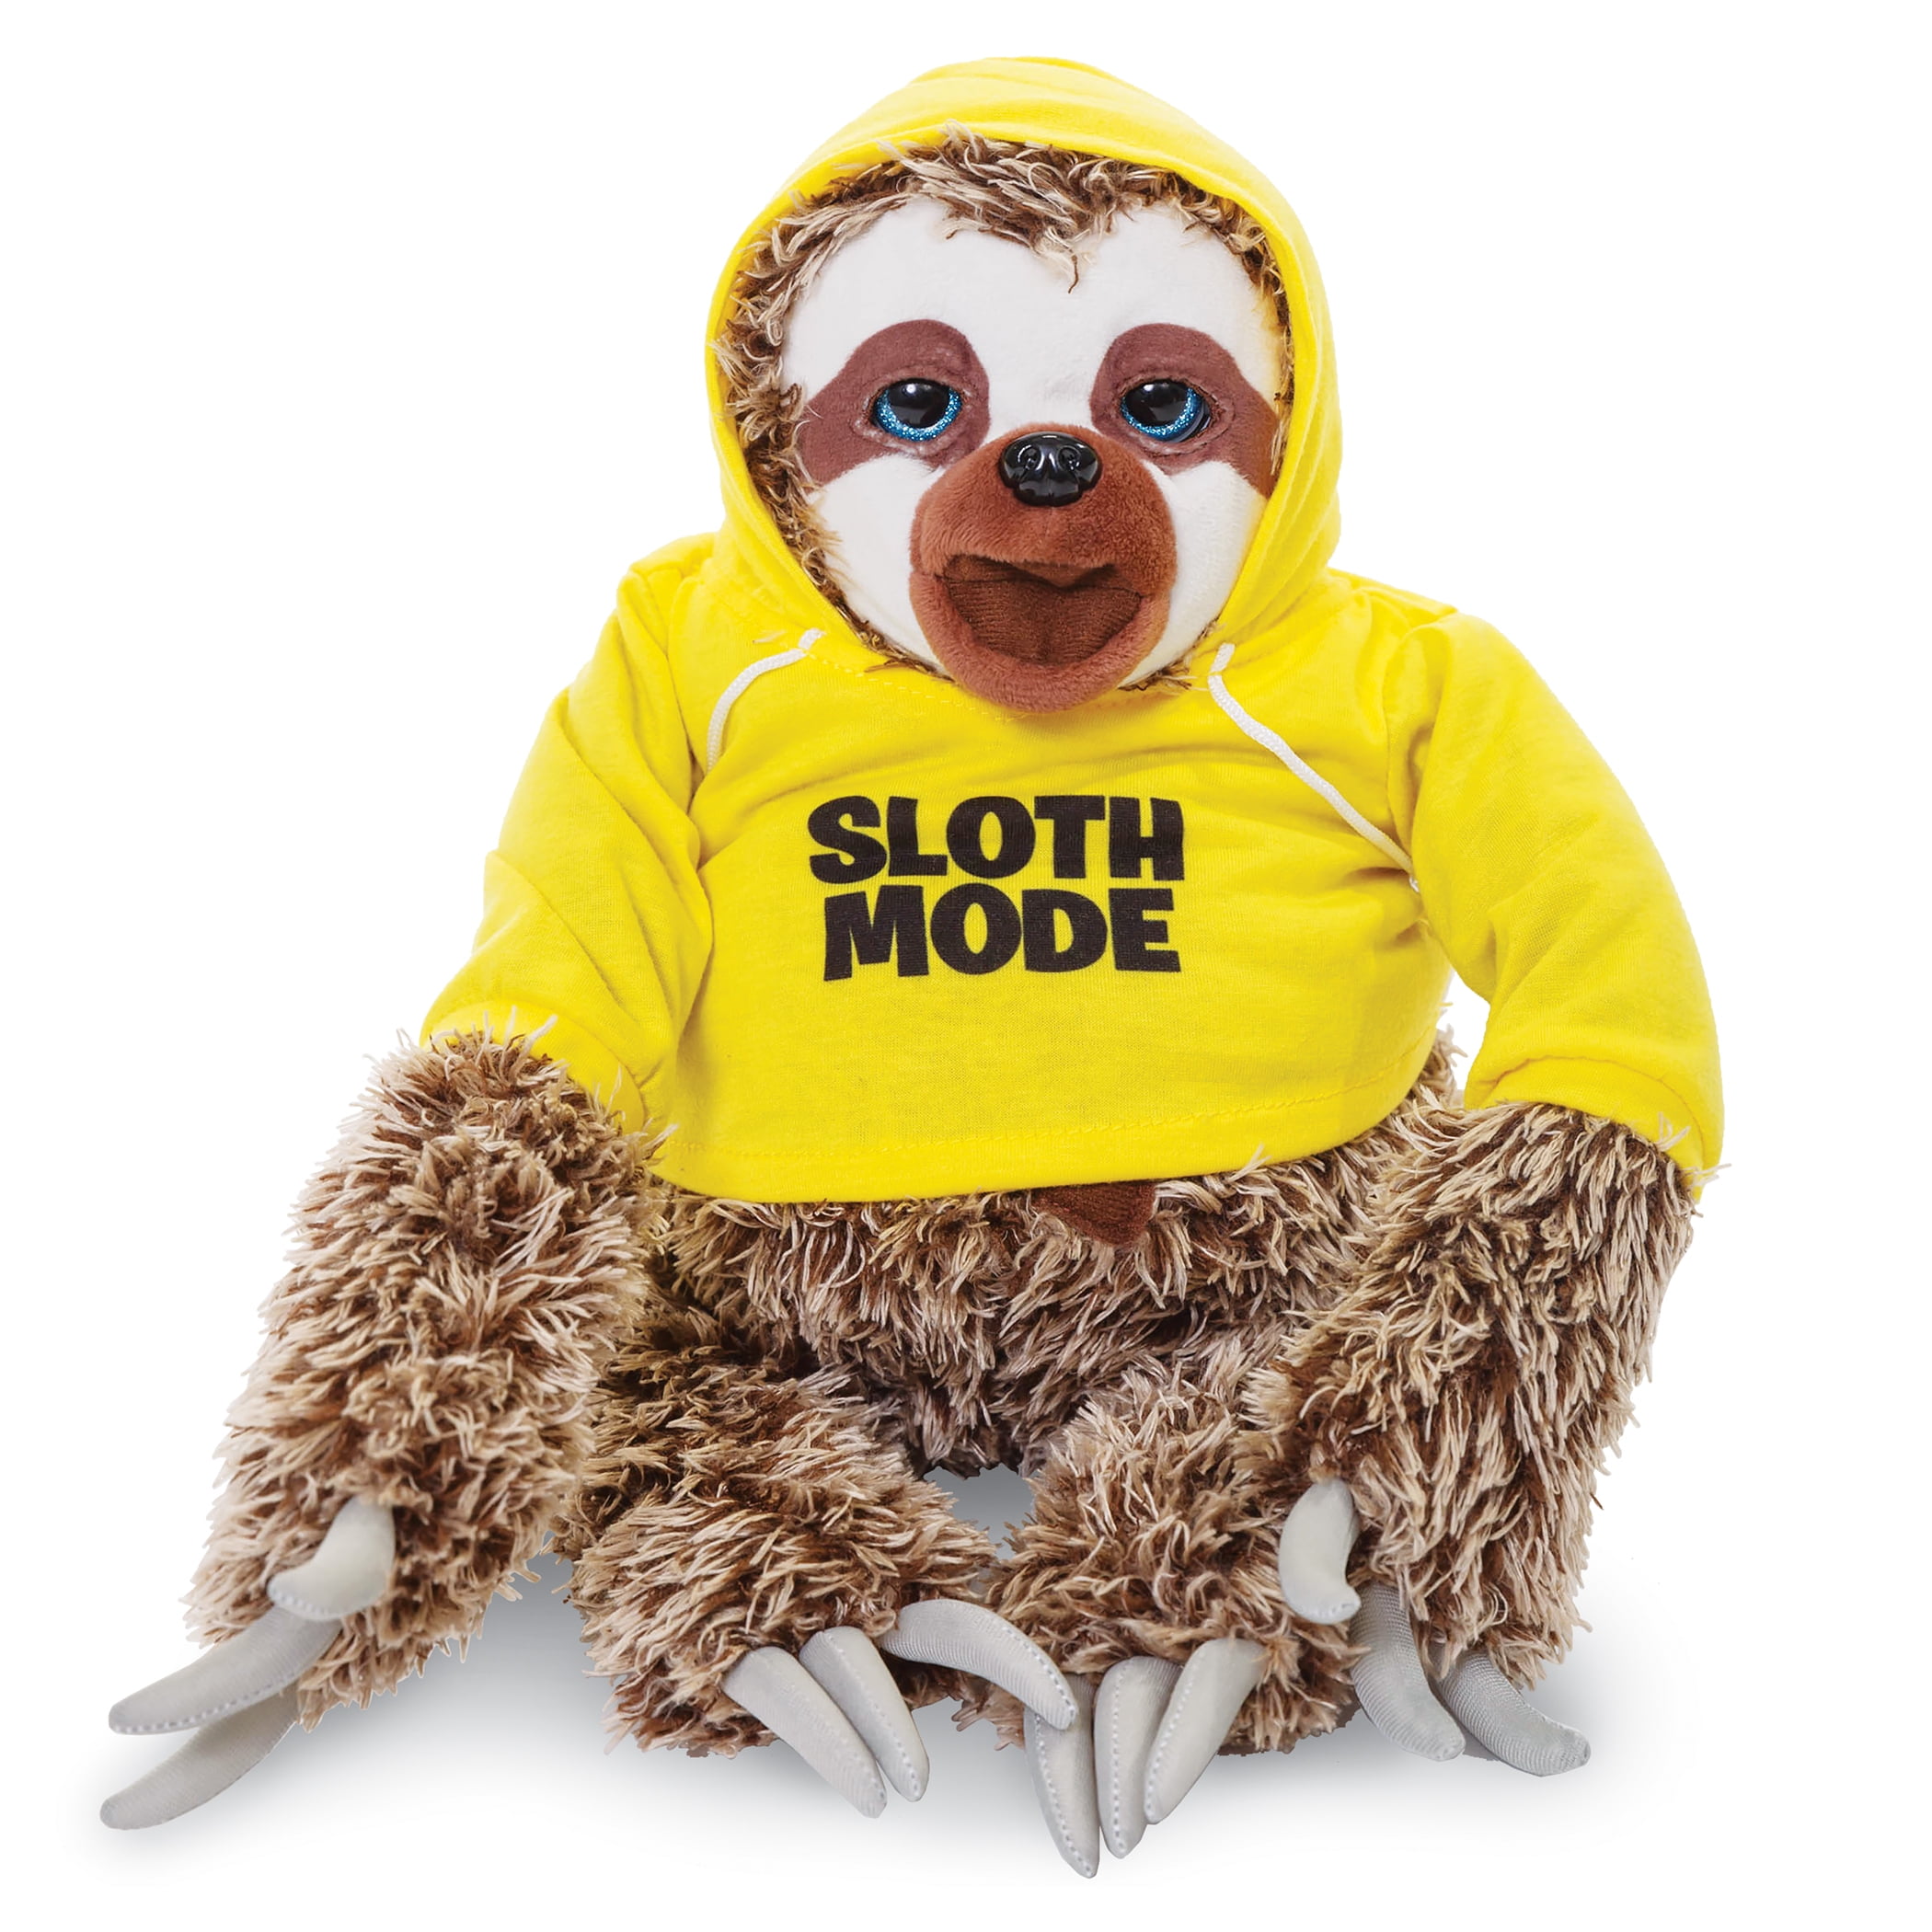 Snax The Sloth Talking Plush Sloth Toy for Kids From a Sloth Life 2020 for sale online 